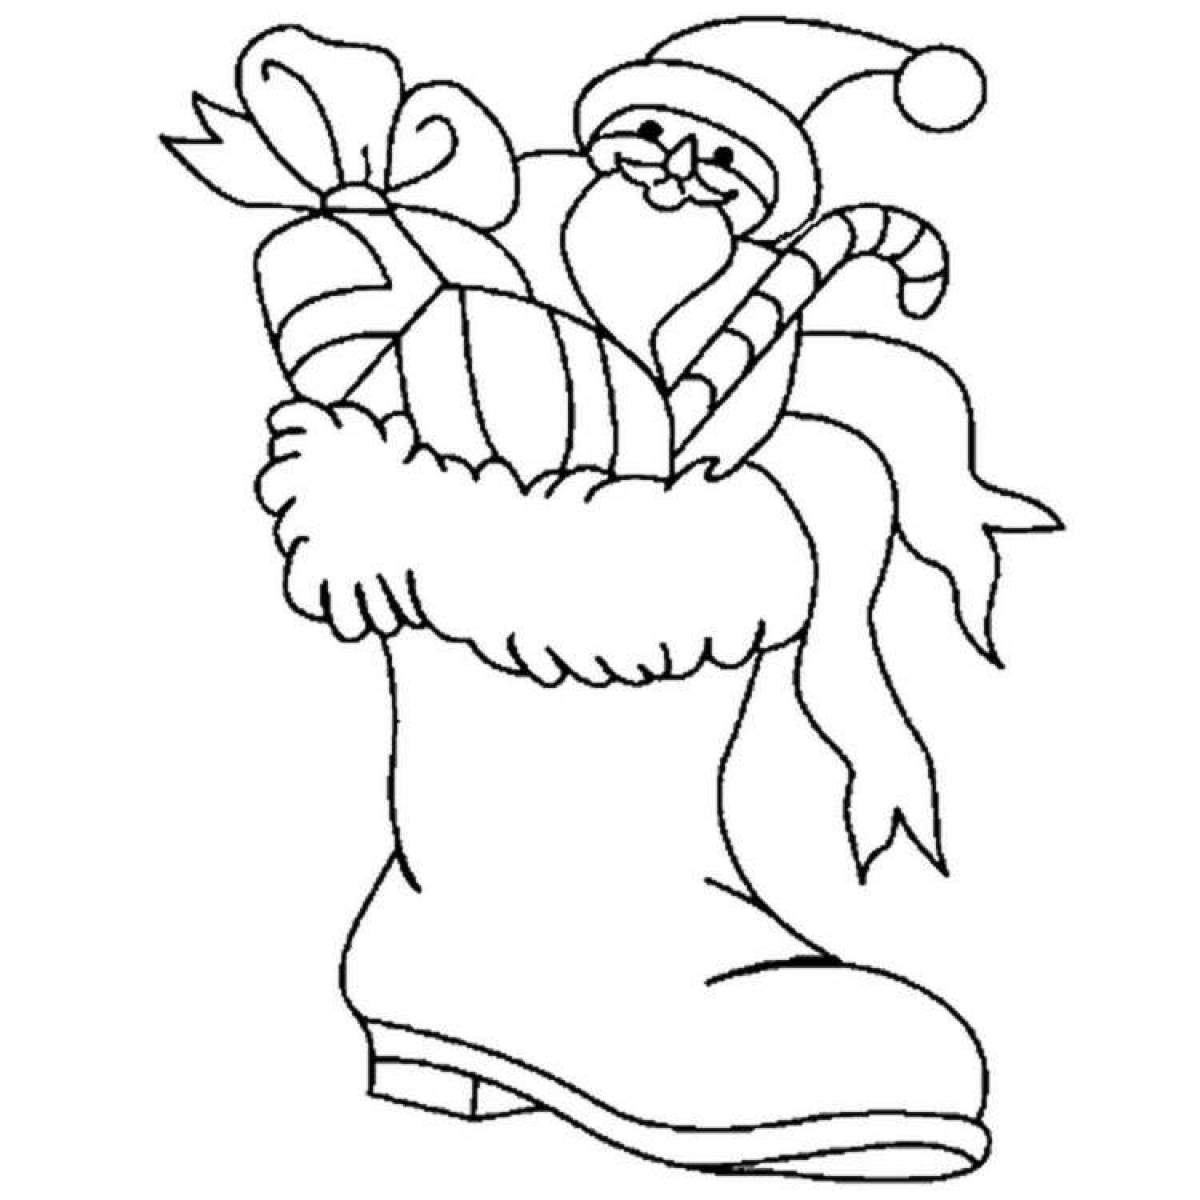 Exquisite christmas boots coloring page